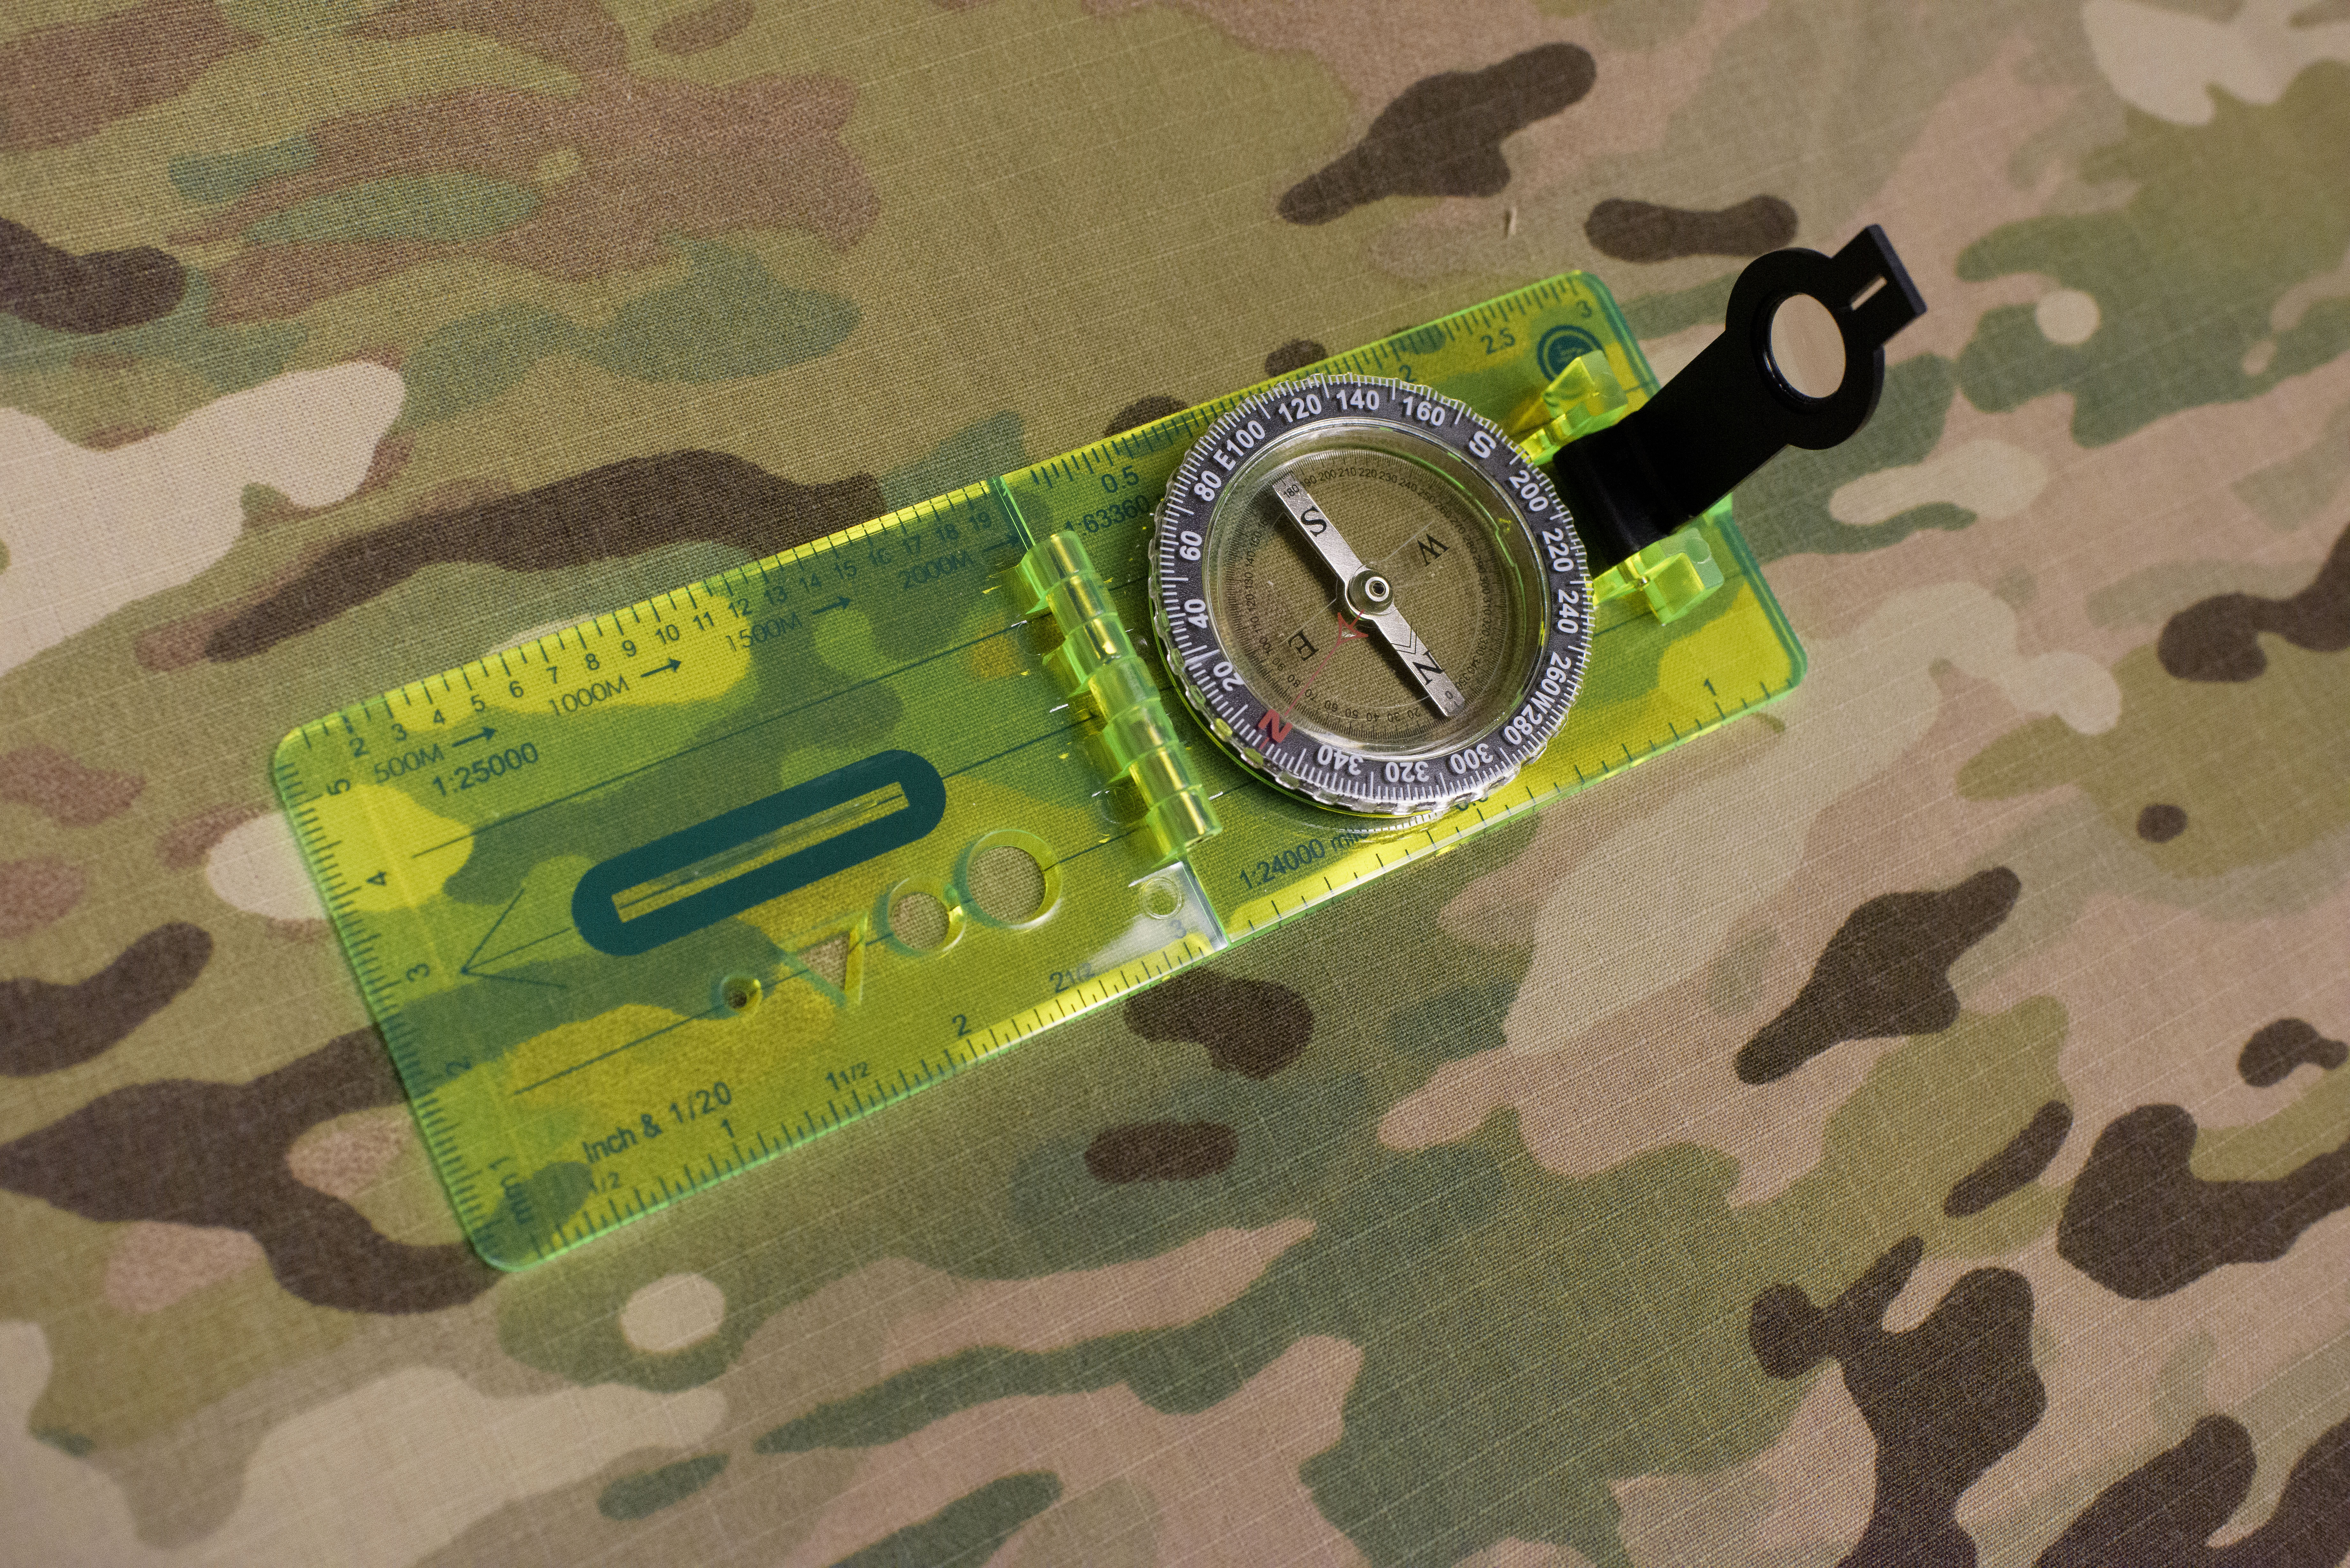 Clear rectangular ruler with an attached compass face and magnifying glass on a camouflage background.